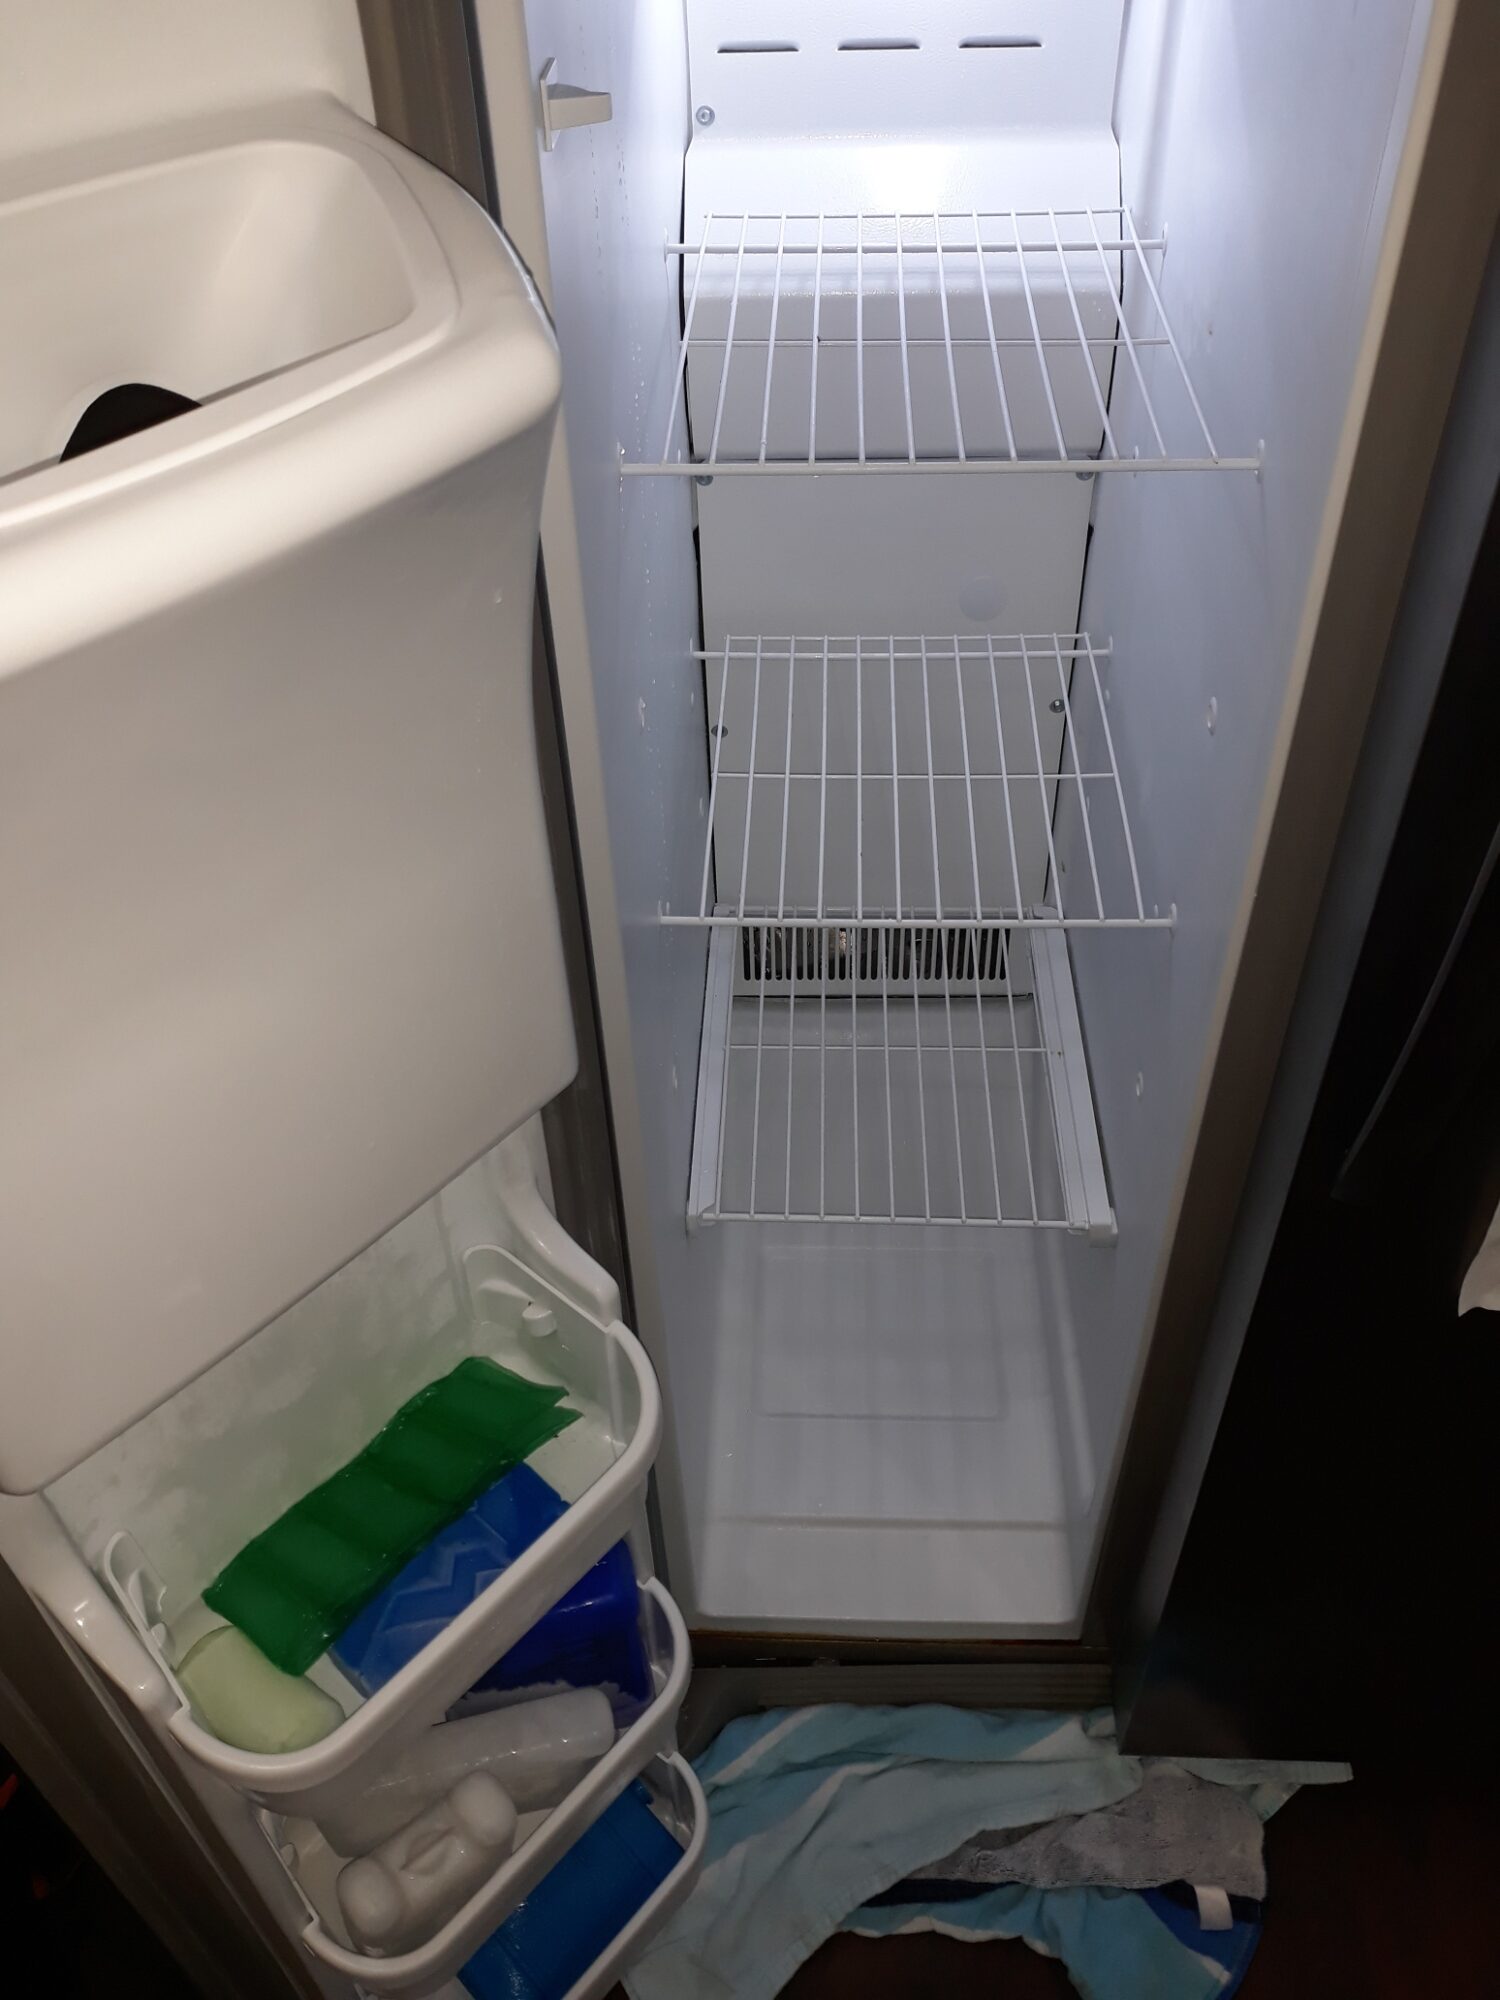 appliance repair refrigerator repair repair required manually defrosting and removing the ice accumulation livingston st baldwin fl 32234